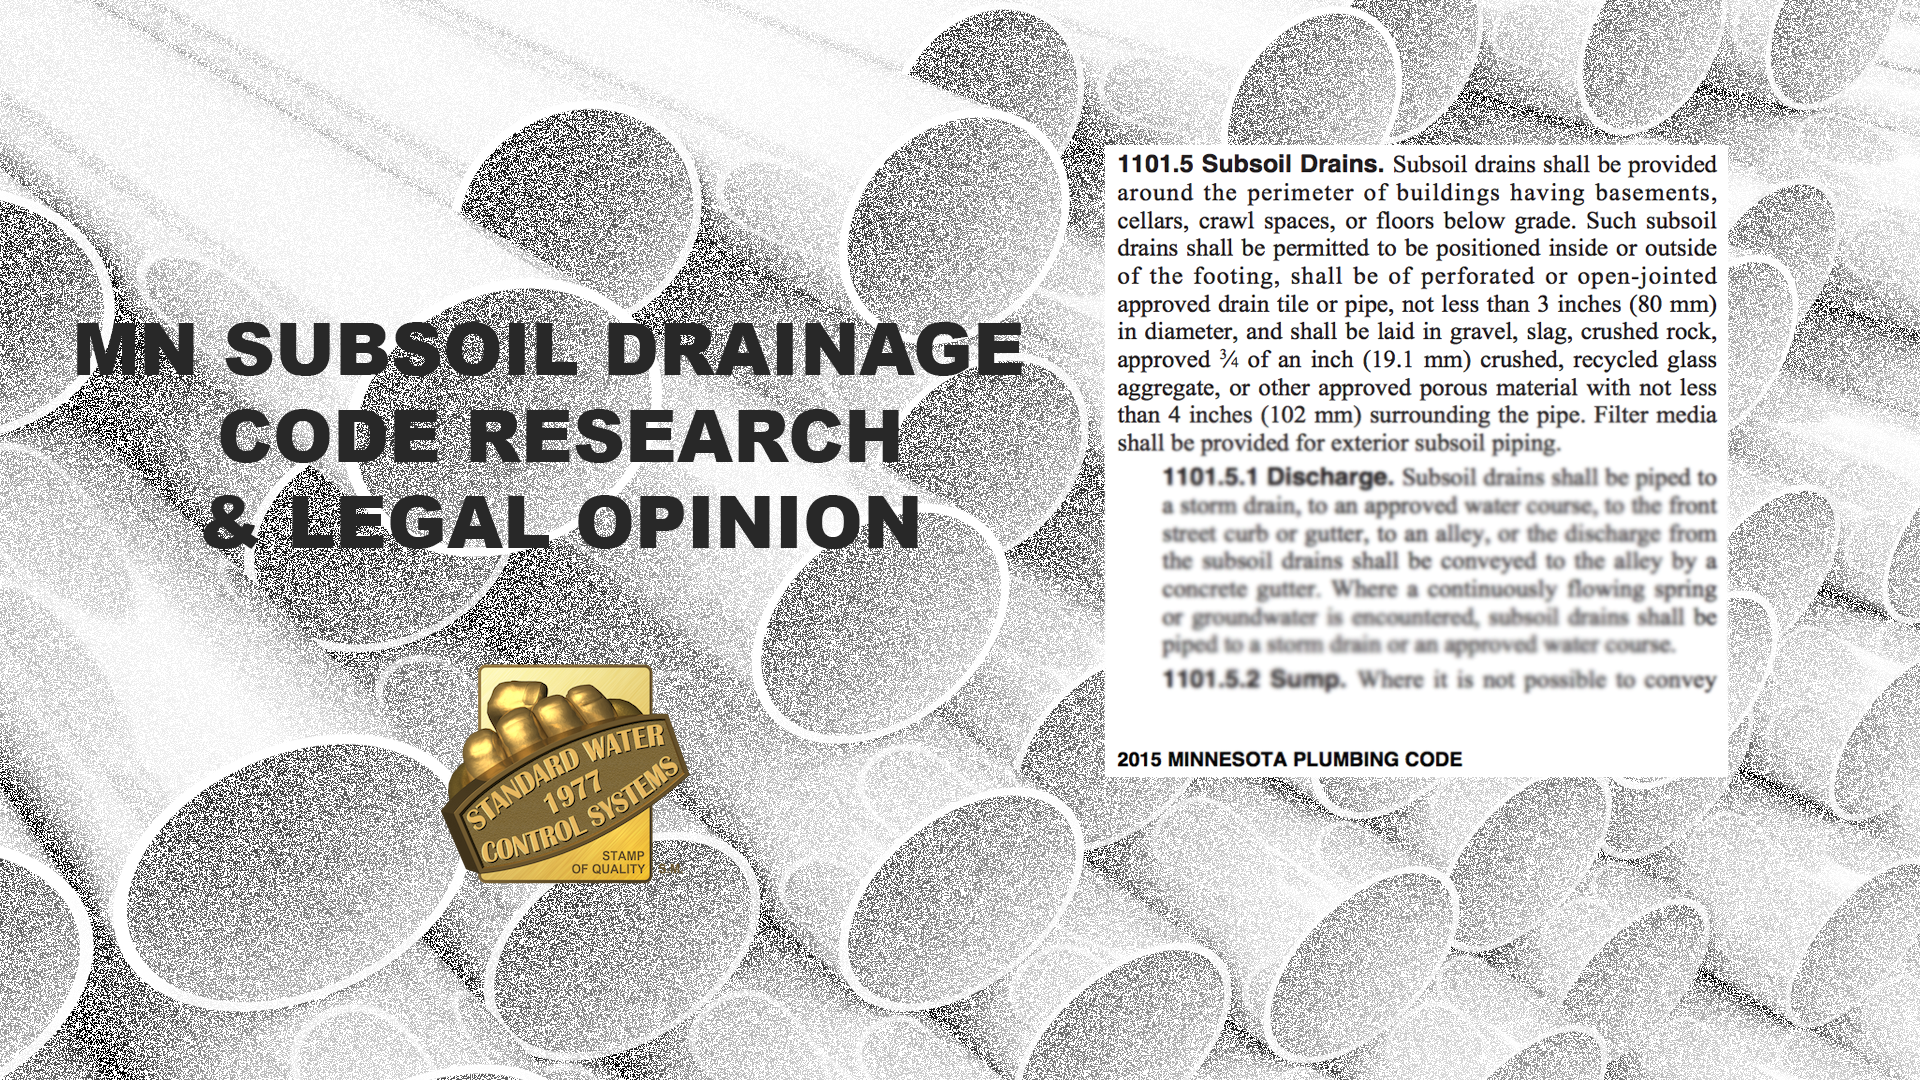 MN Subsoil Drainage Code Research & Legal Opinion